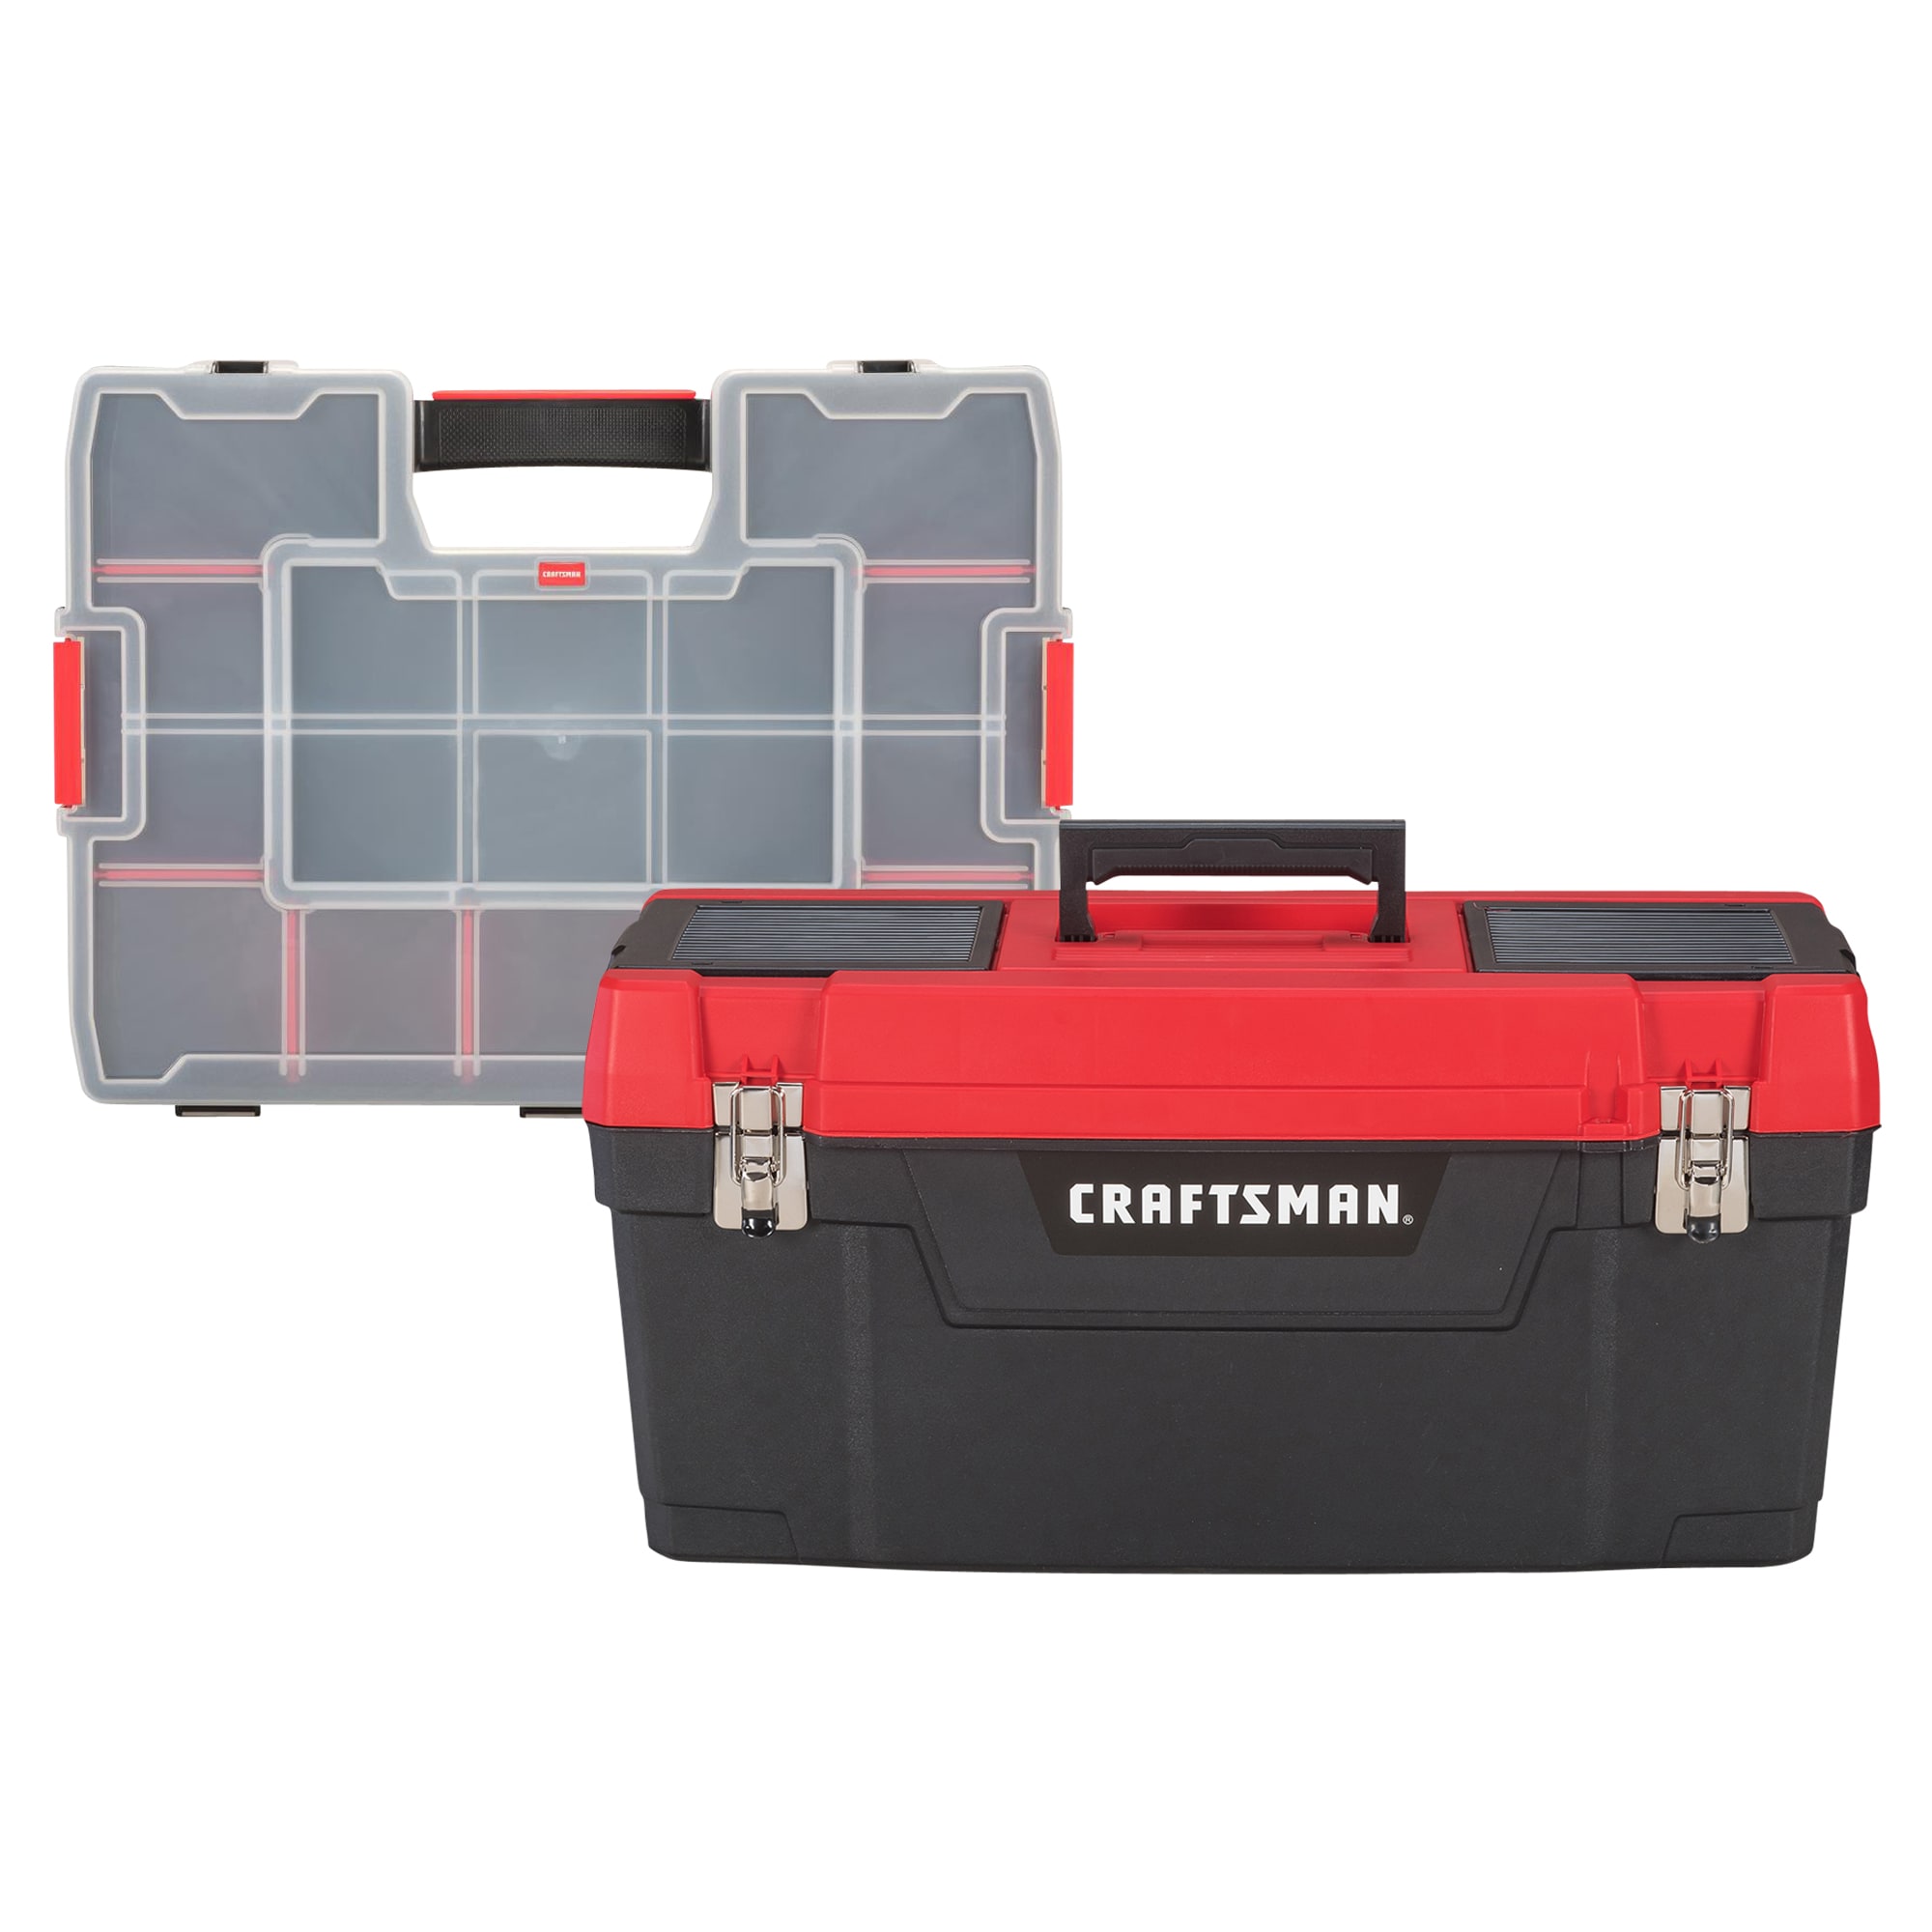 Save On Craftsman Tool Storage During This Lowe's Sale